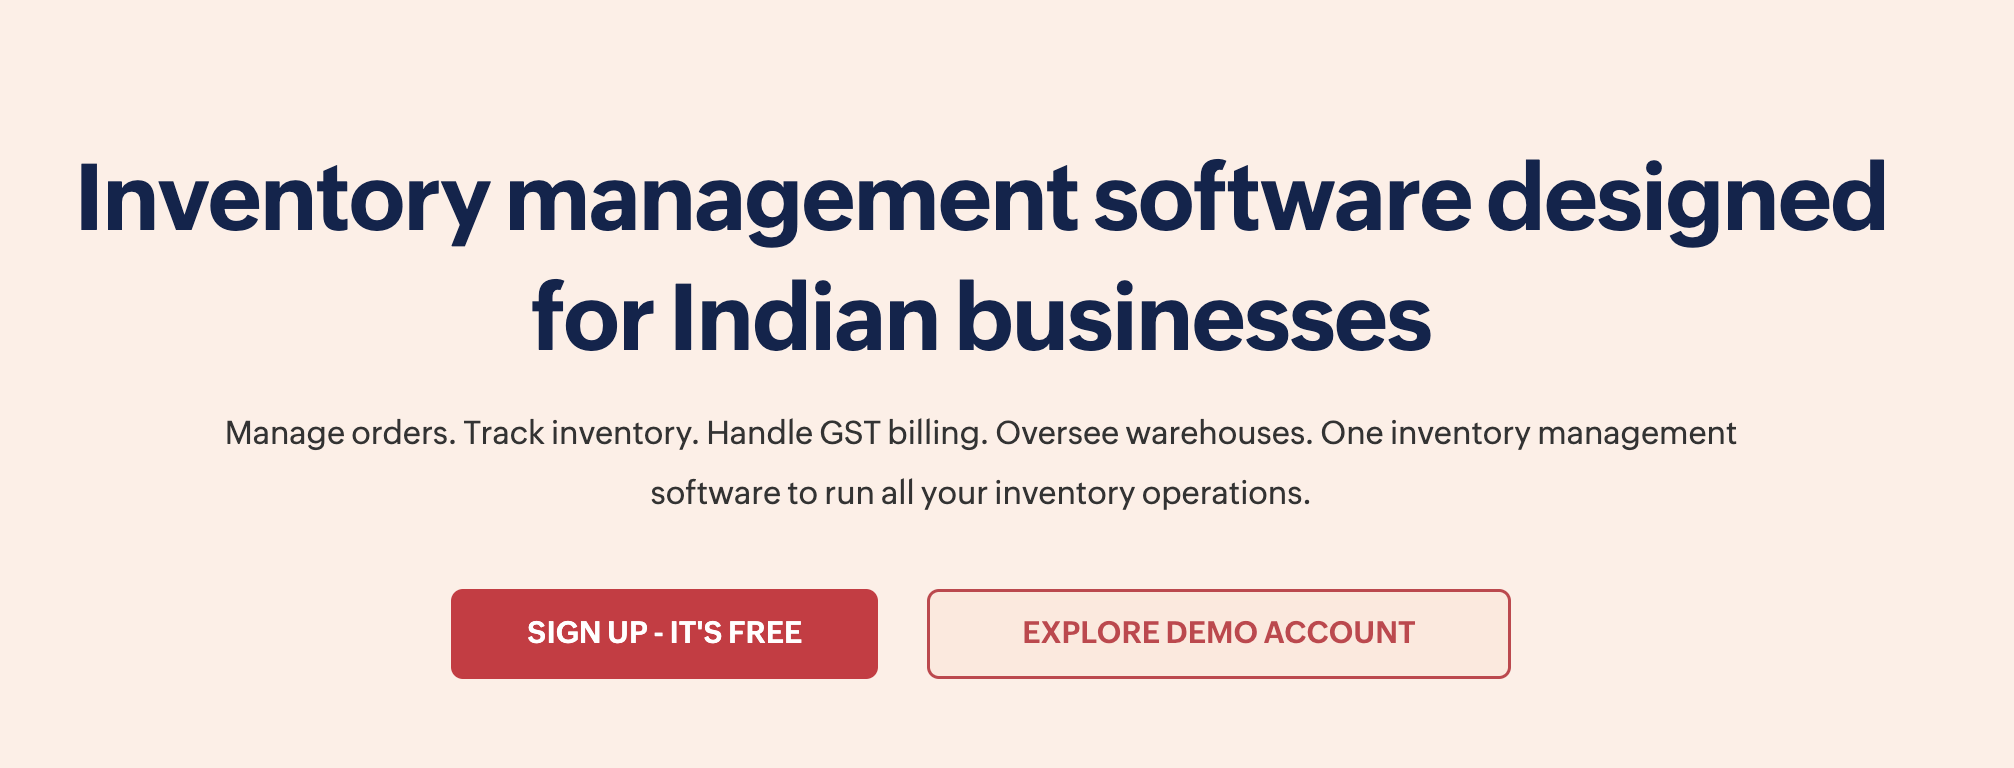 ecommerce inventory management software